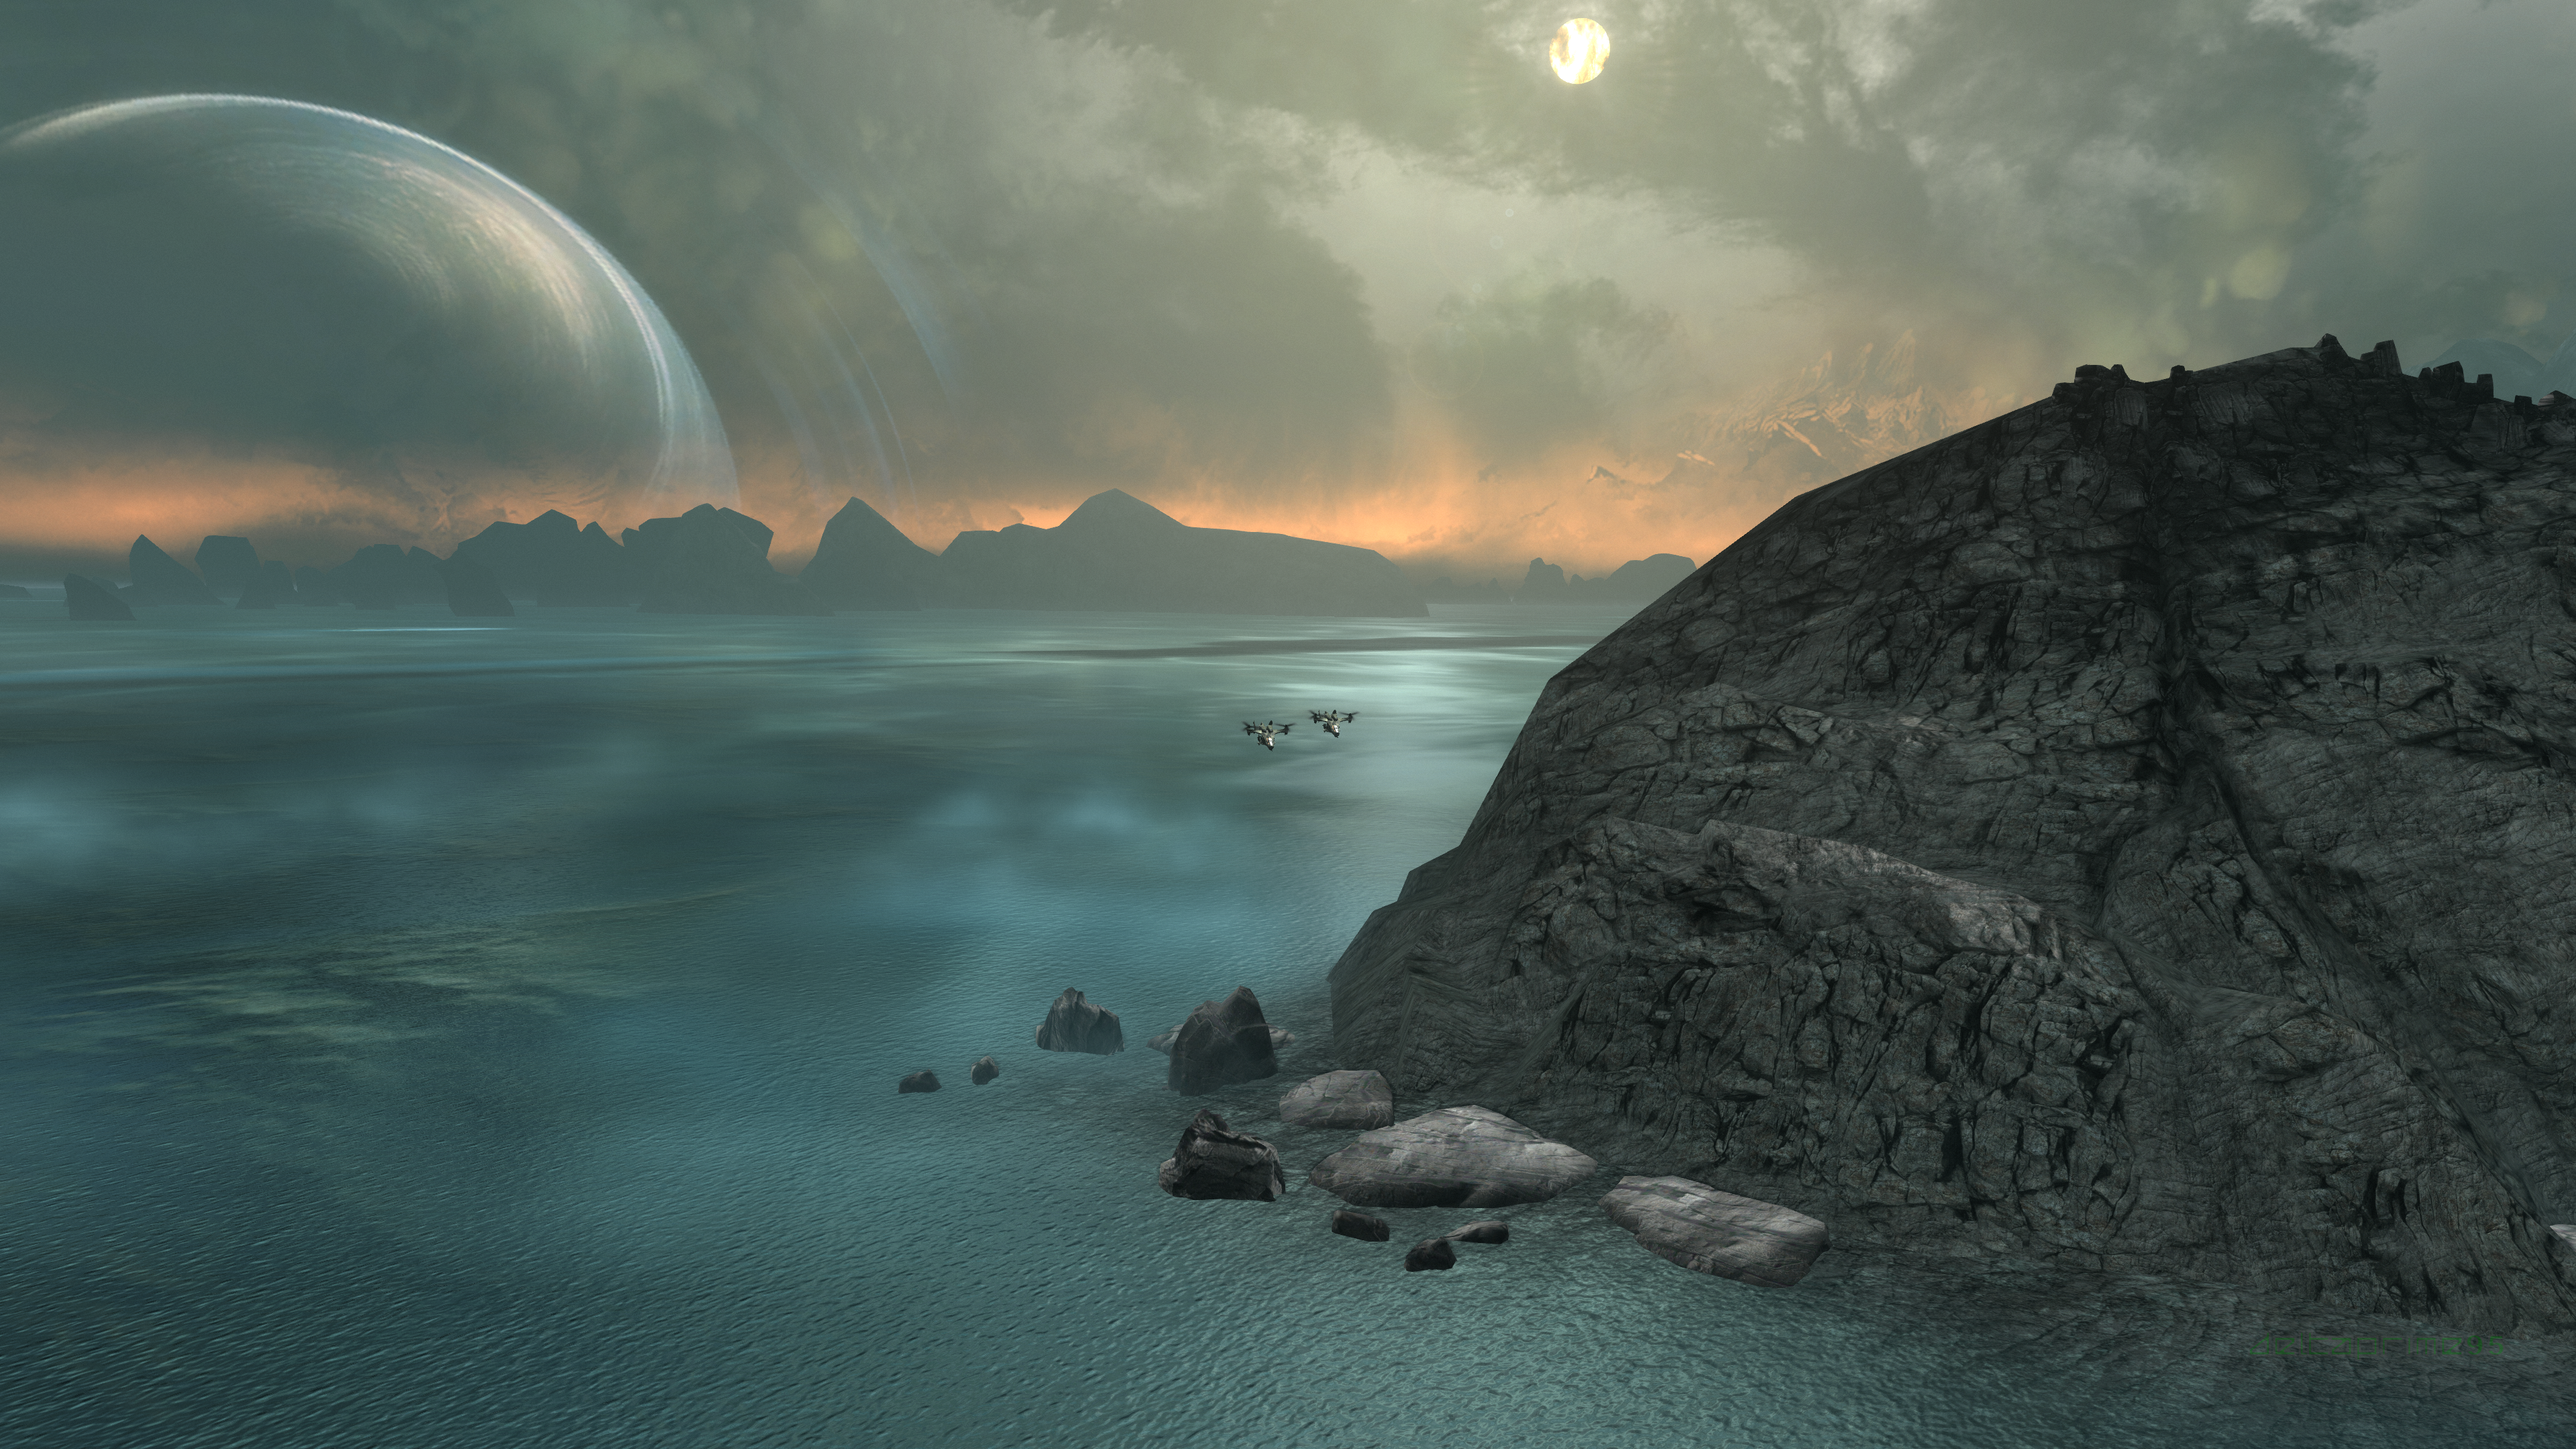 PC Gaming In Game Screen Shot Video Games Science Fiction Futuristic Halo Reach Planet Reach Water A 3840x2160